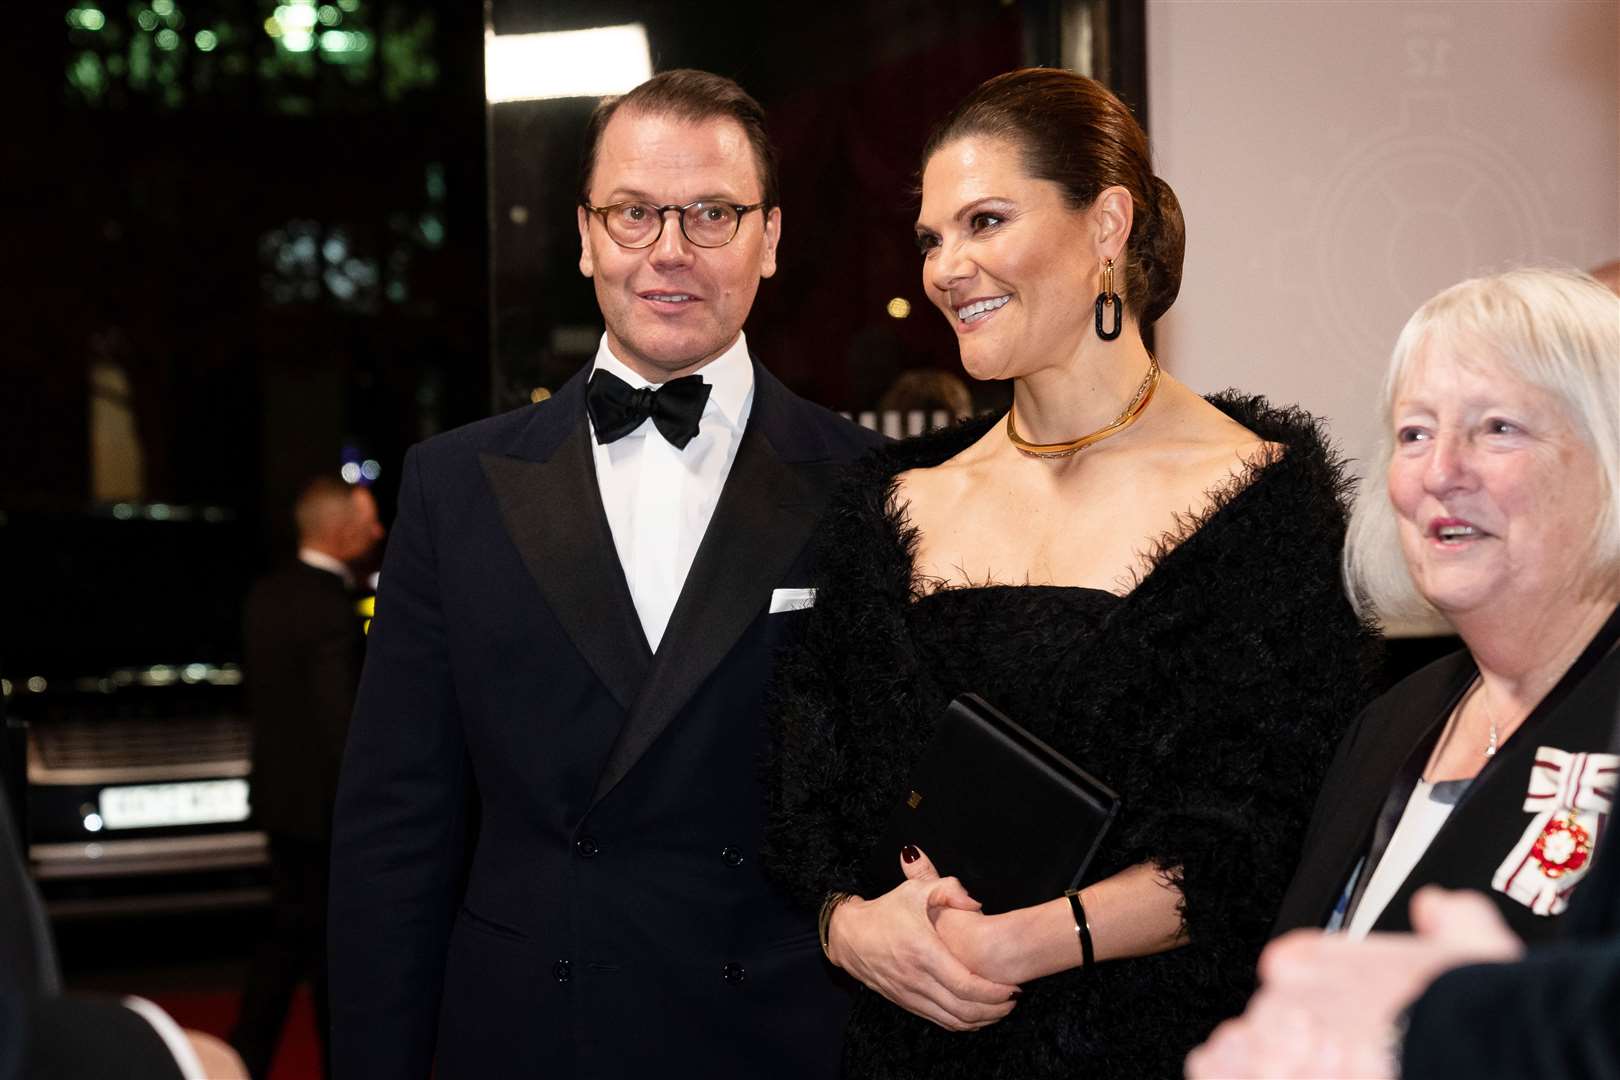 Crown Princess Victoria and Prince Daniel of Sweden were also attending the Royal Variety Performance as part of their official visit to the UK (Aaron Chown/PA)